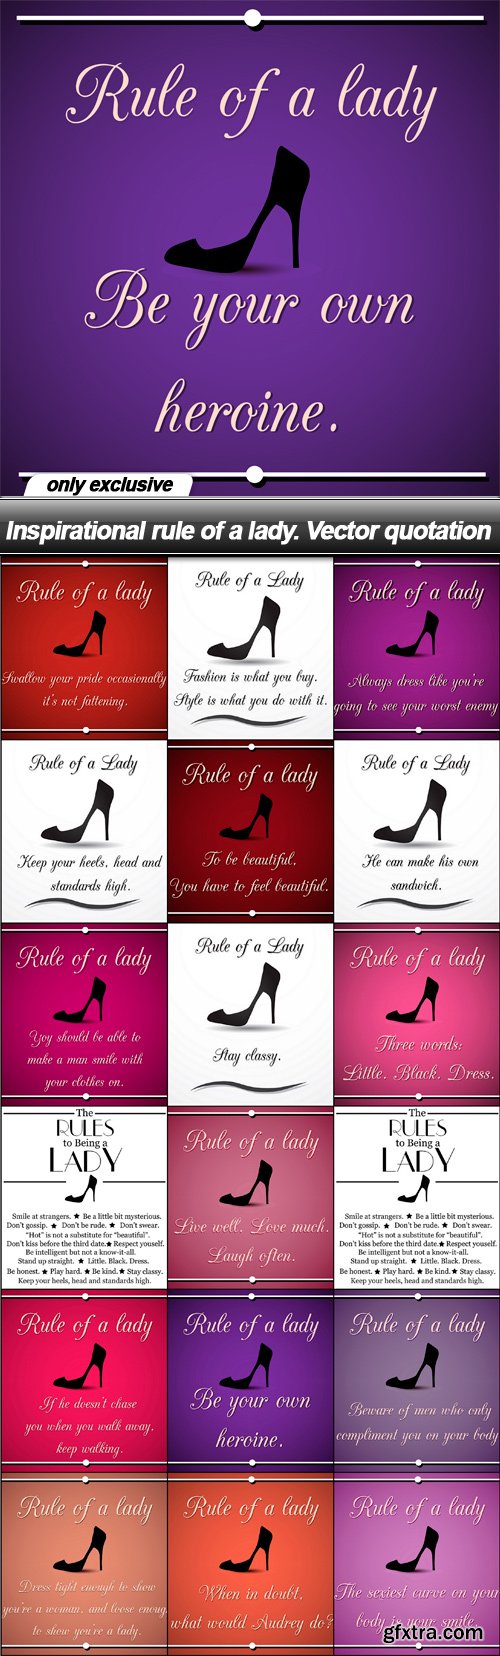 Inspirational rule of a lady. Vector quotation - 18 EPS